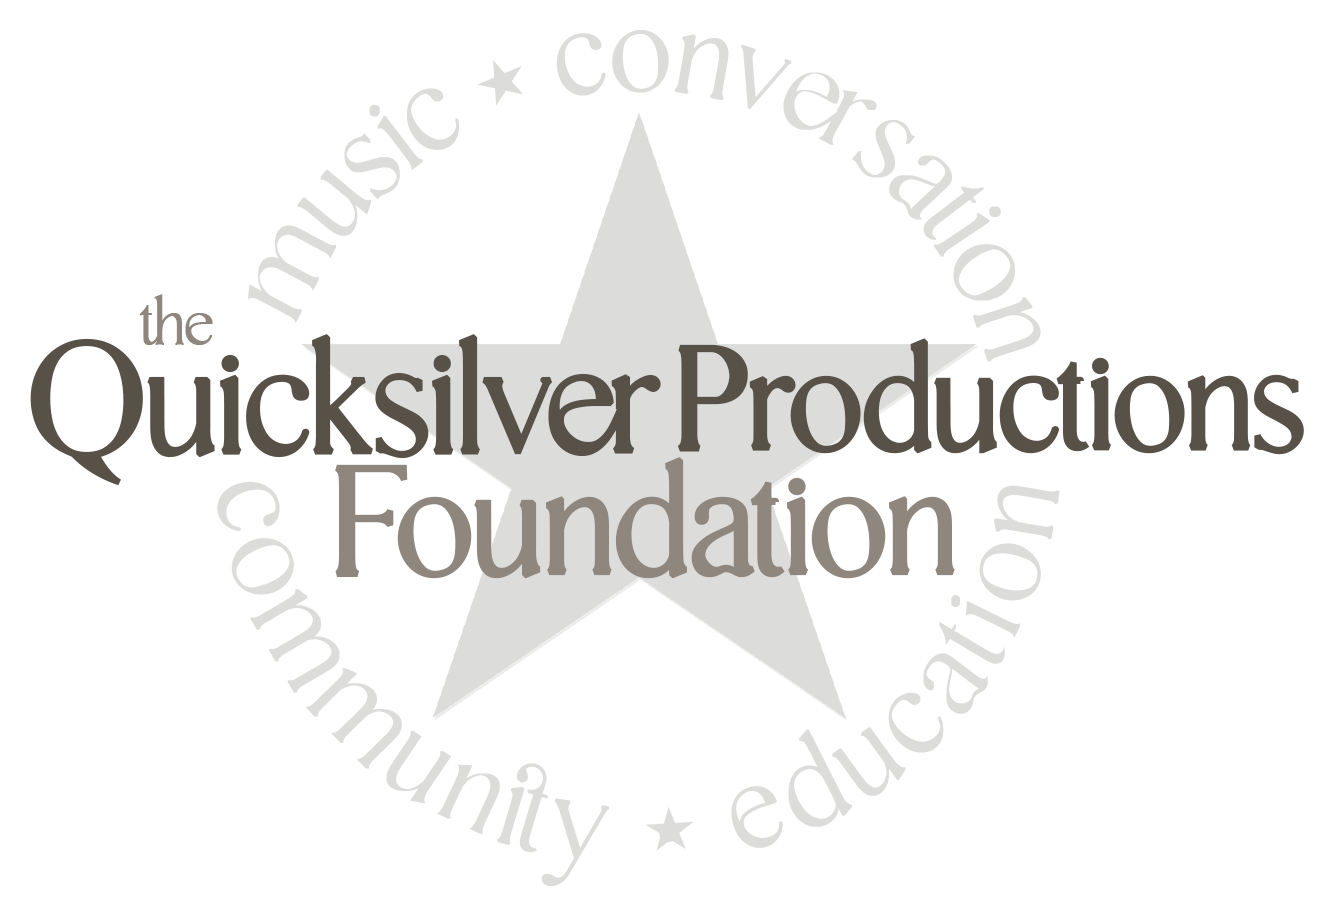 The Quicksilver Productions Foundation